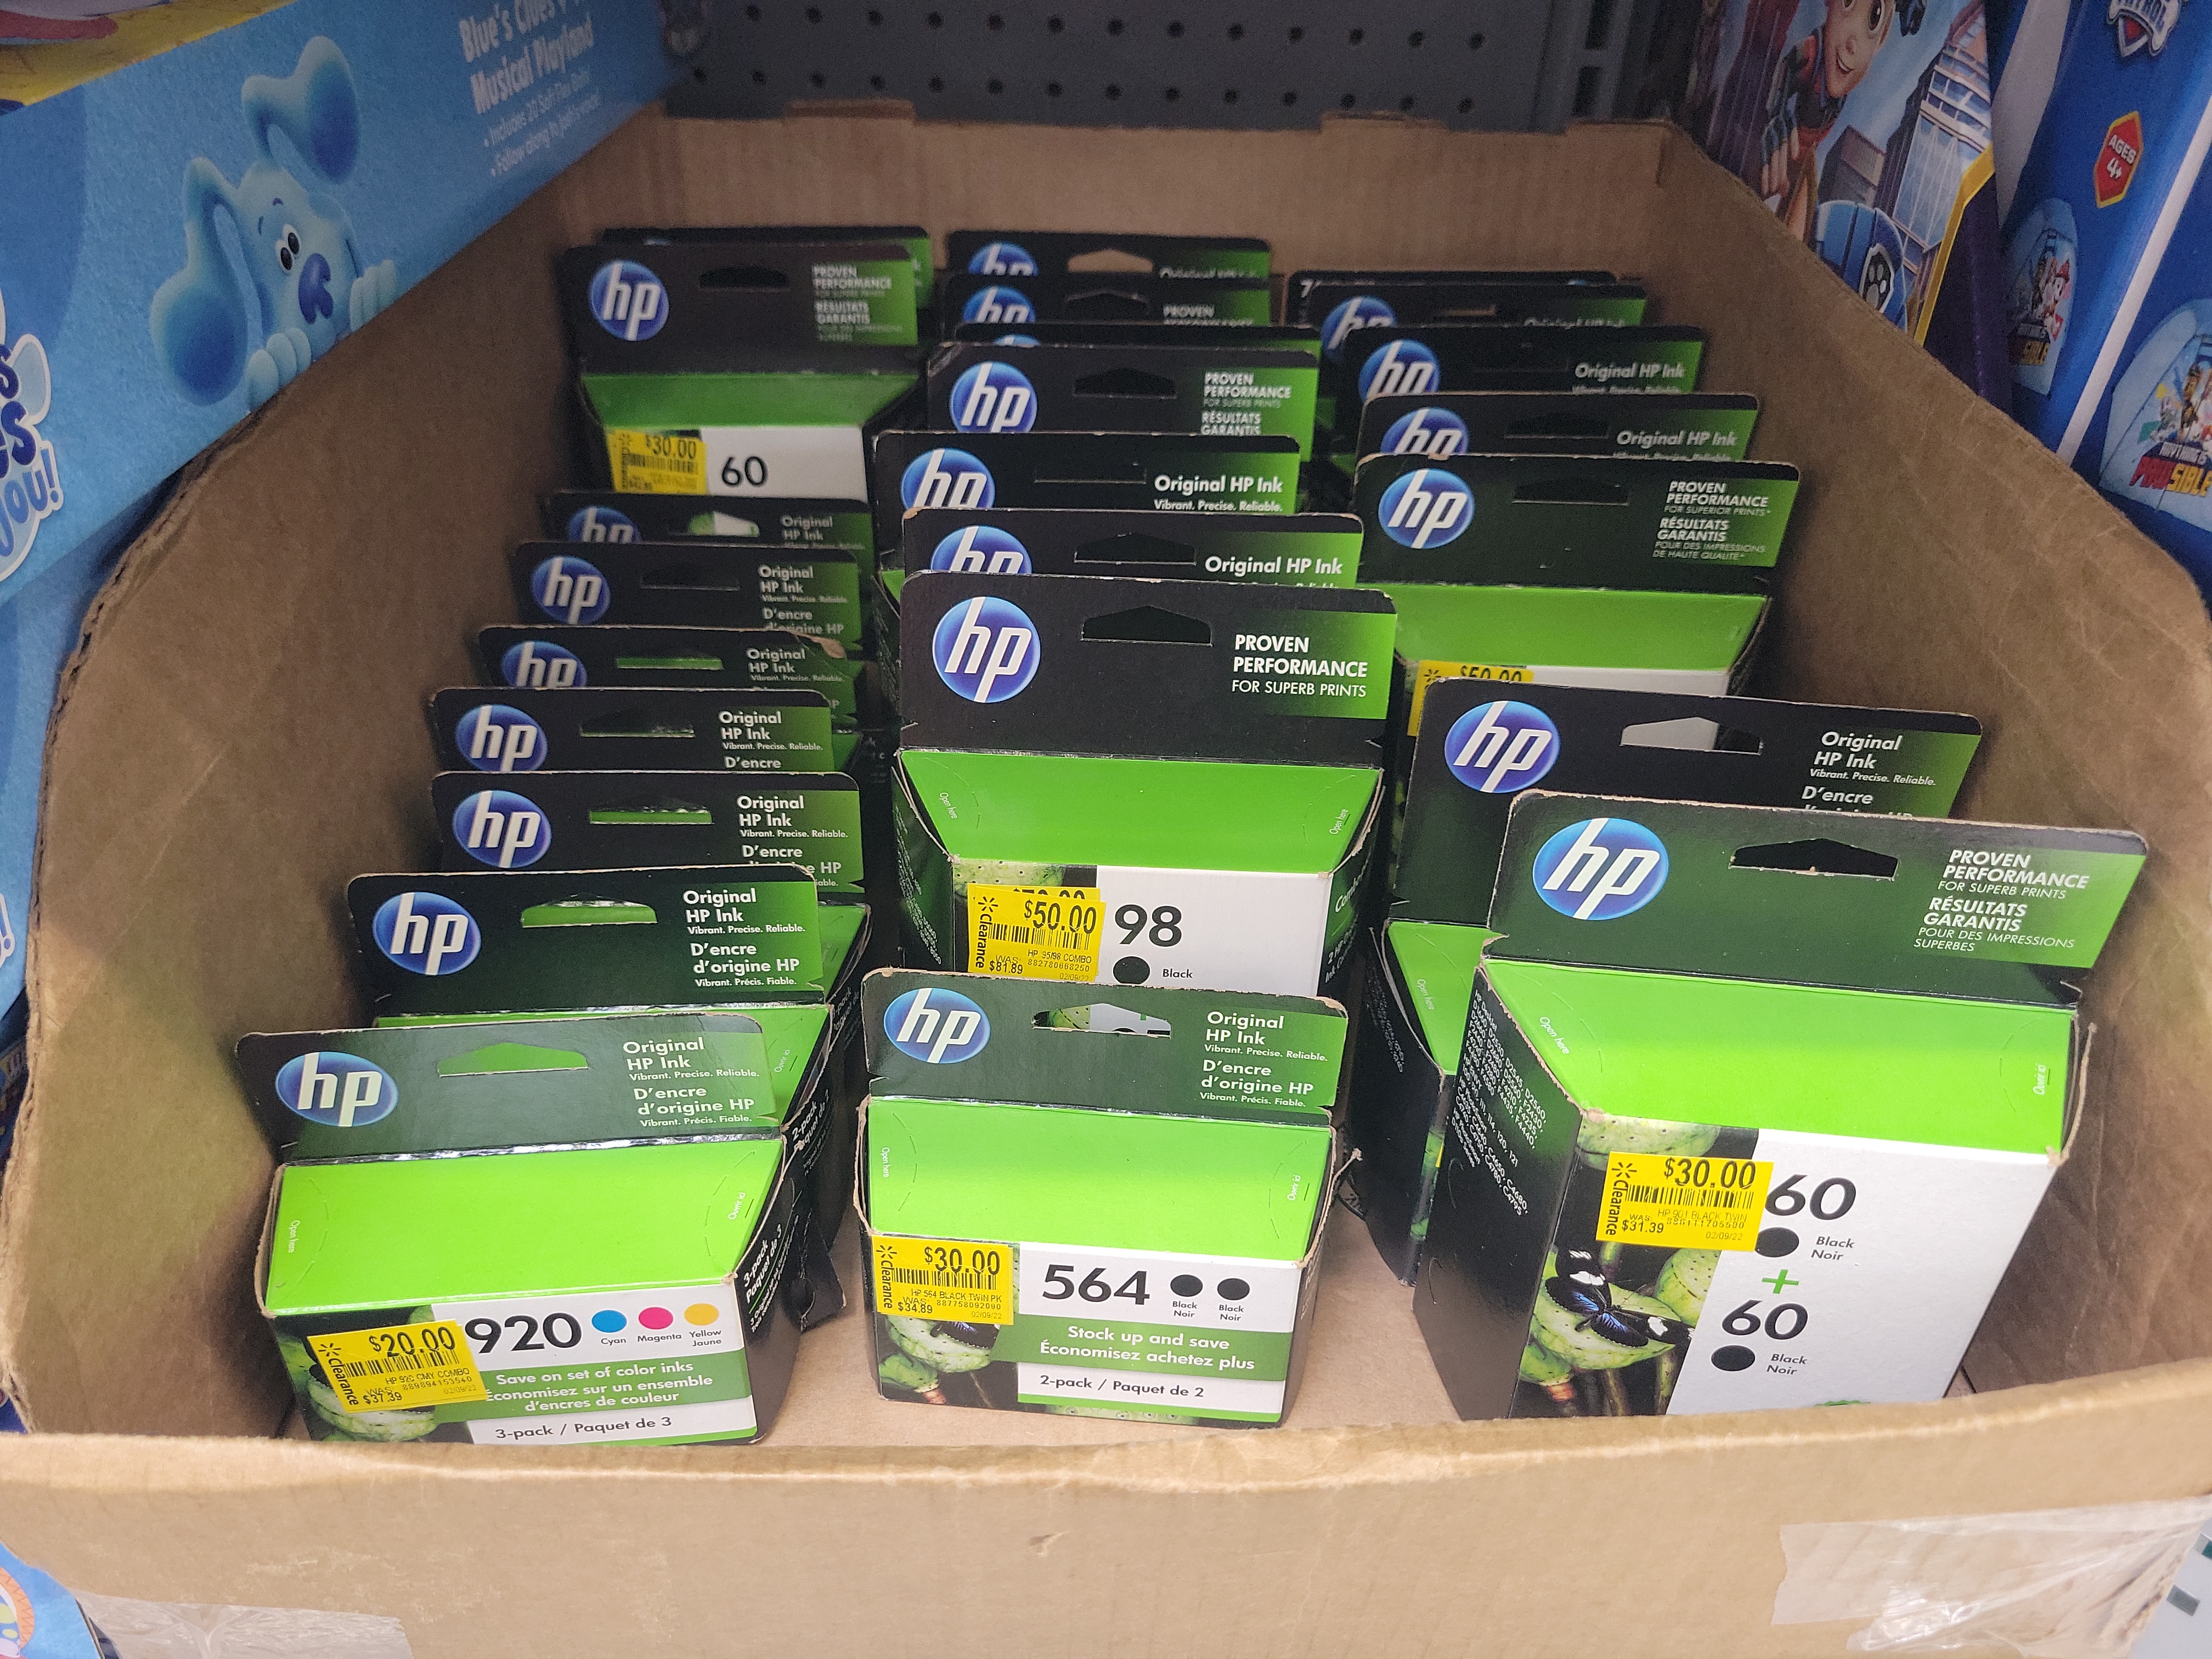 YMMV Walmart Various HP Ink on clearance as low as $20